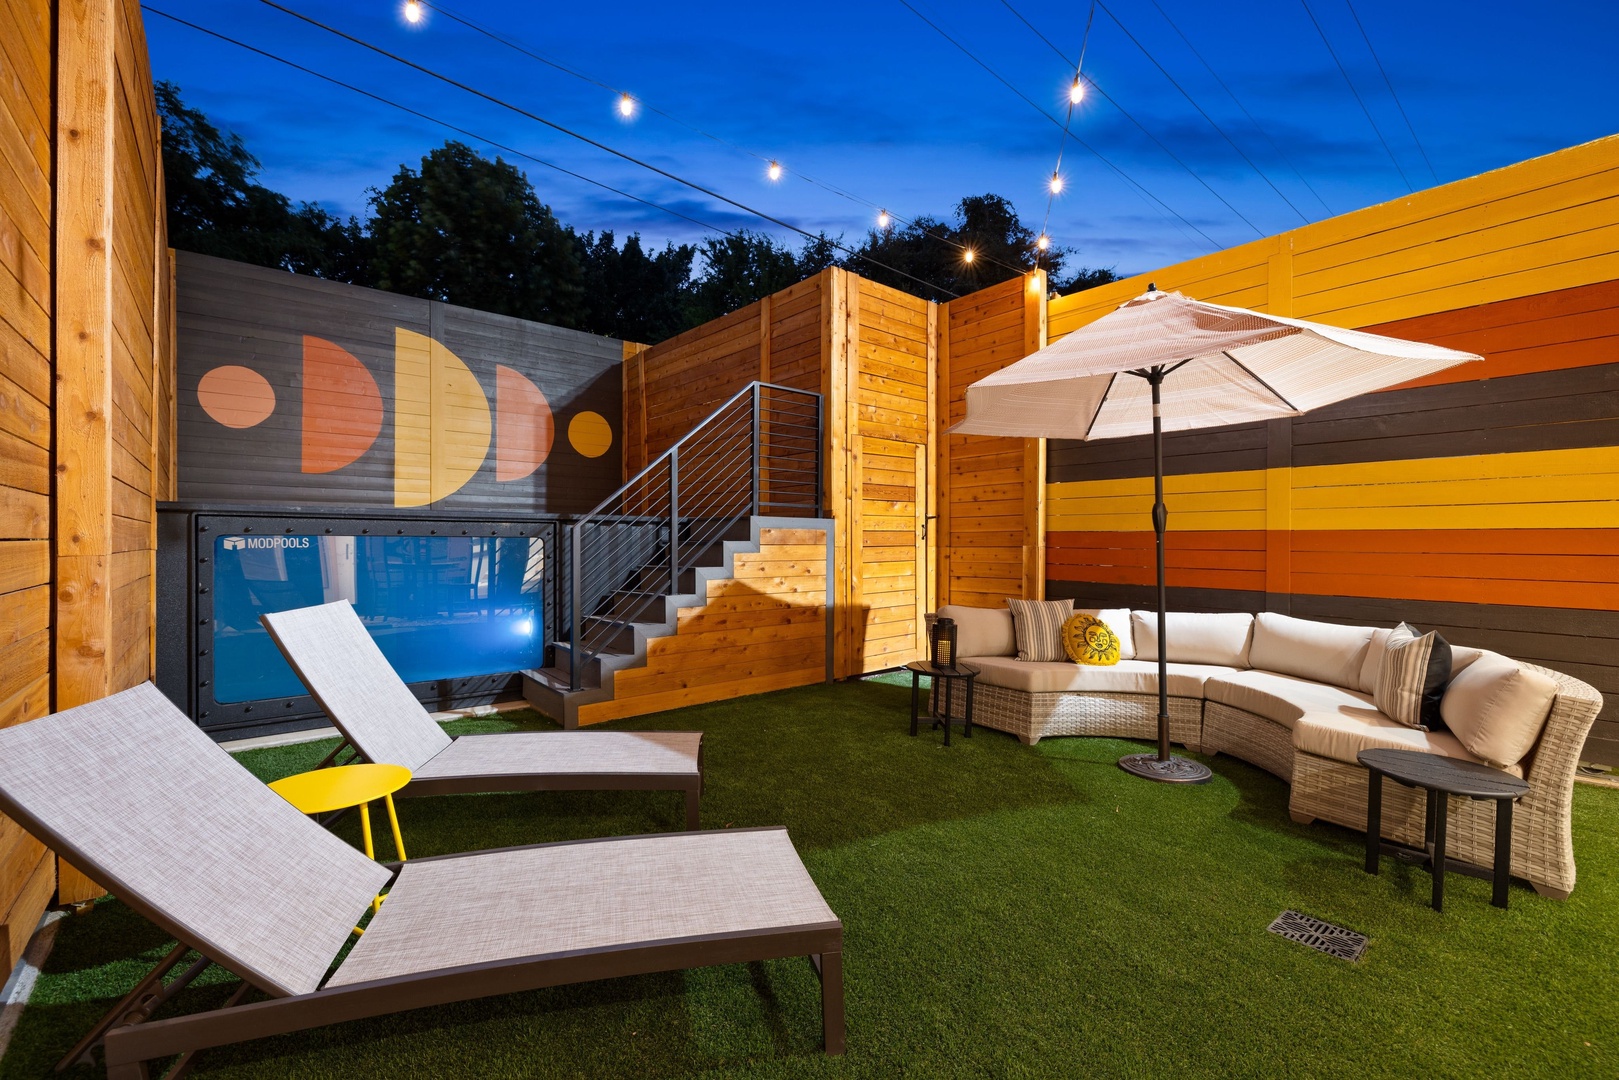 Charming Backyard w/ Private Container Pool : -)